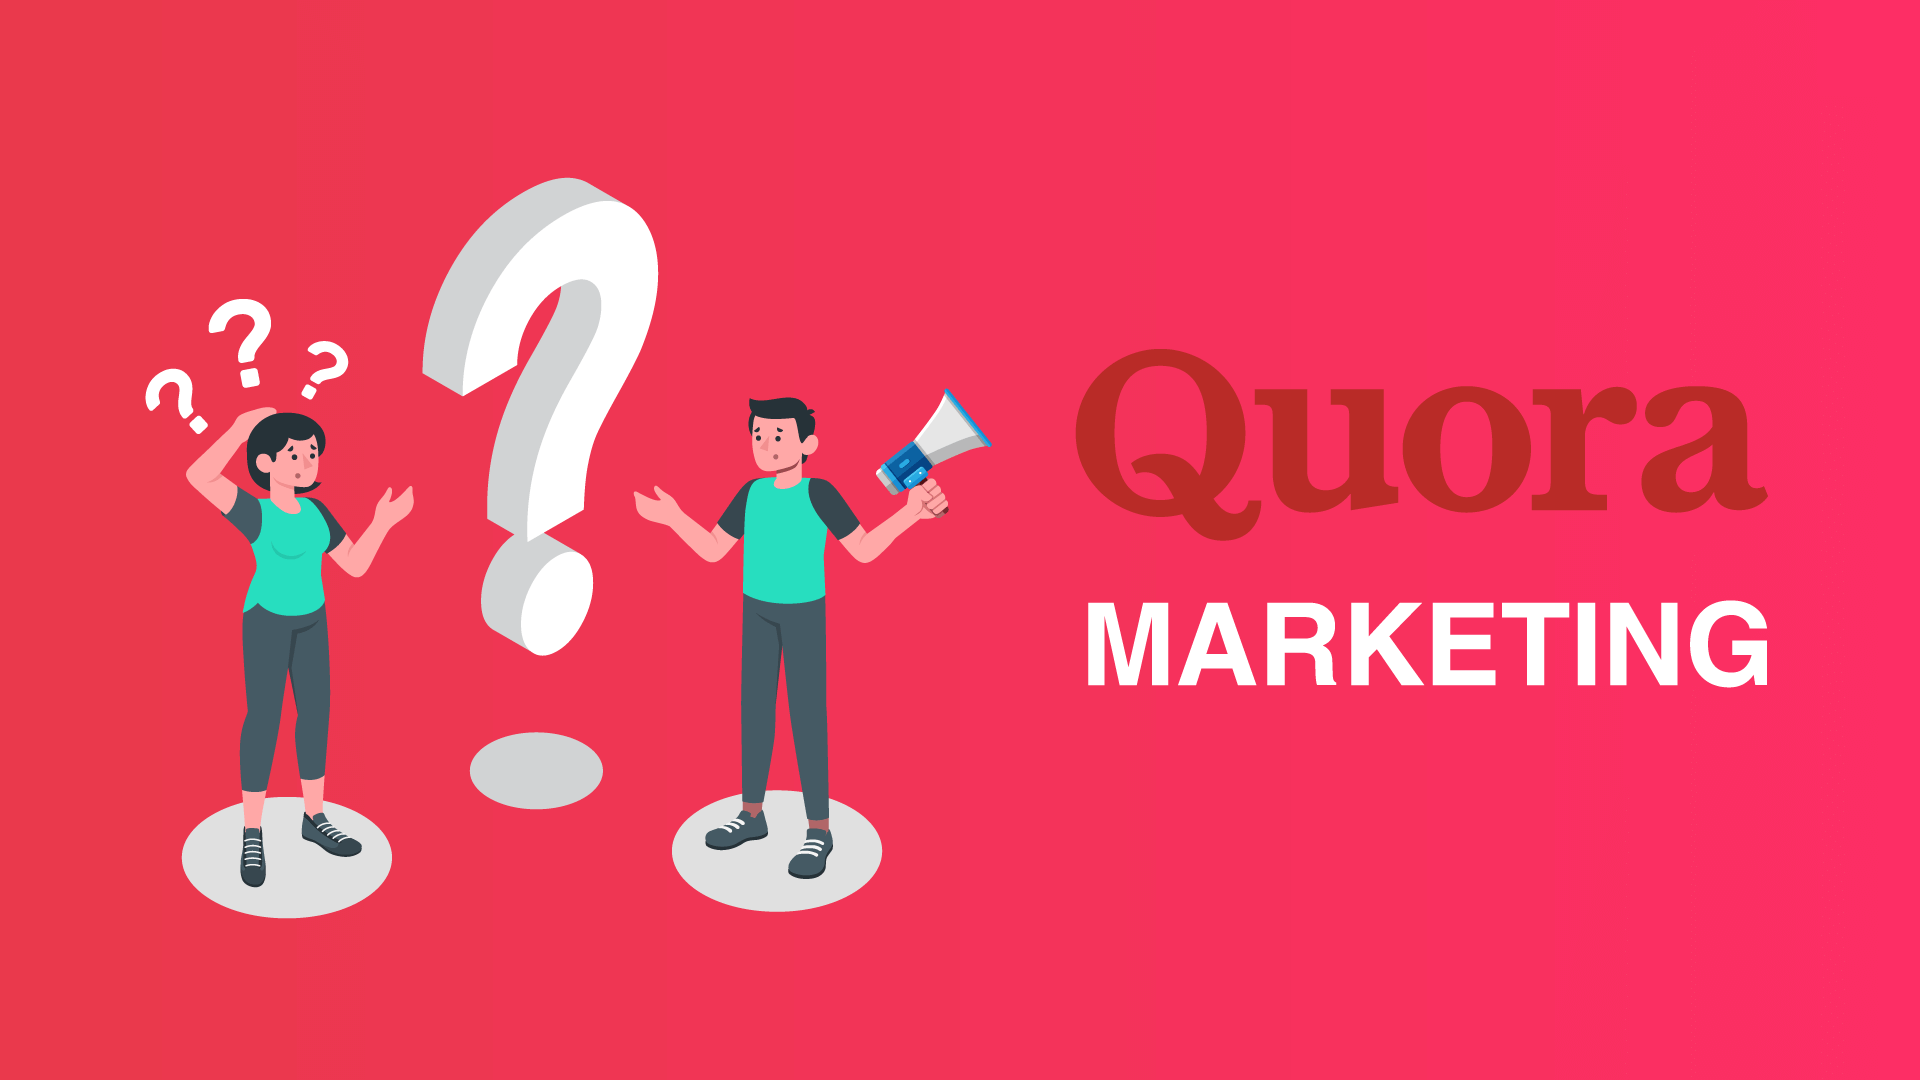 How To Use Quora To Promote Your Business | TSMG Team